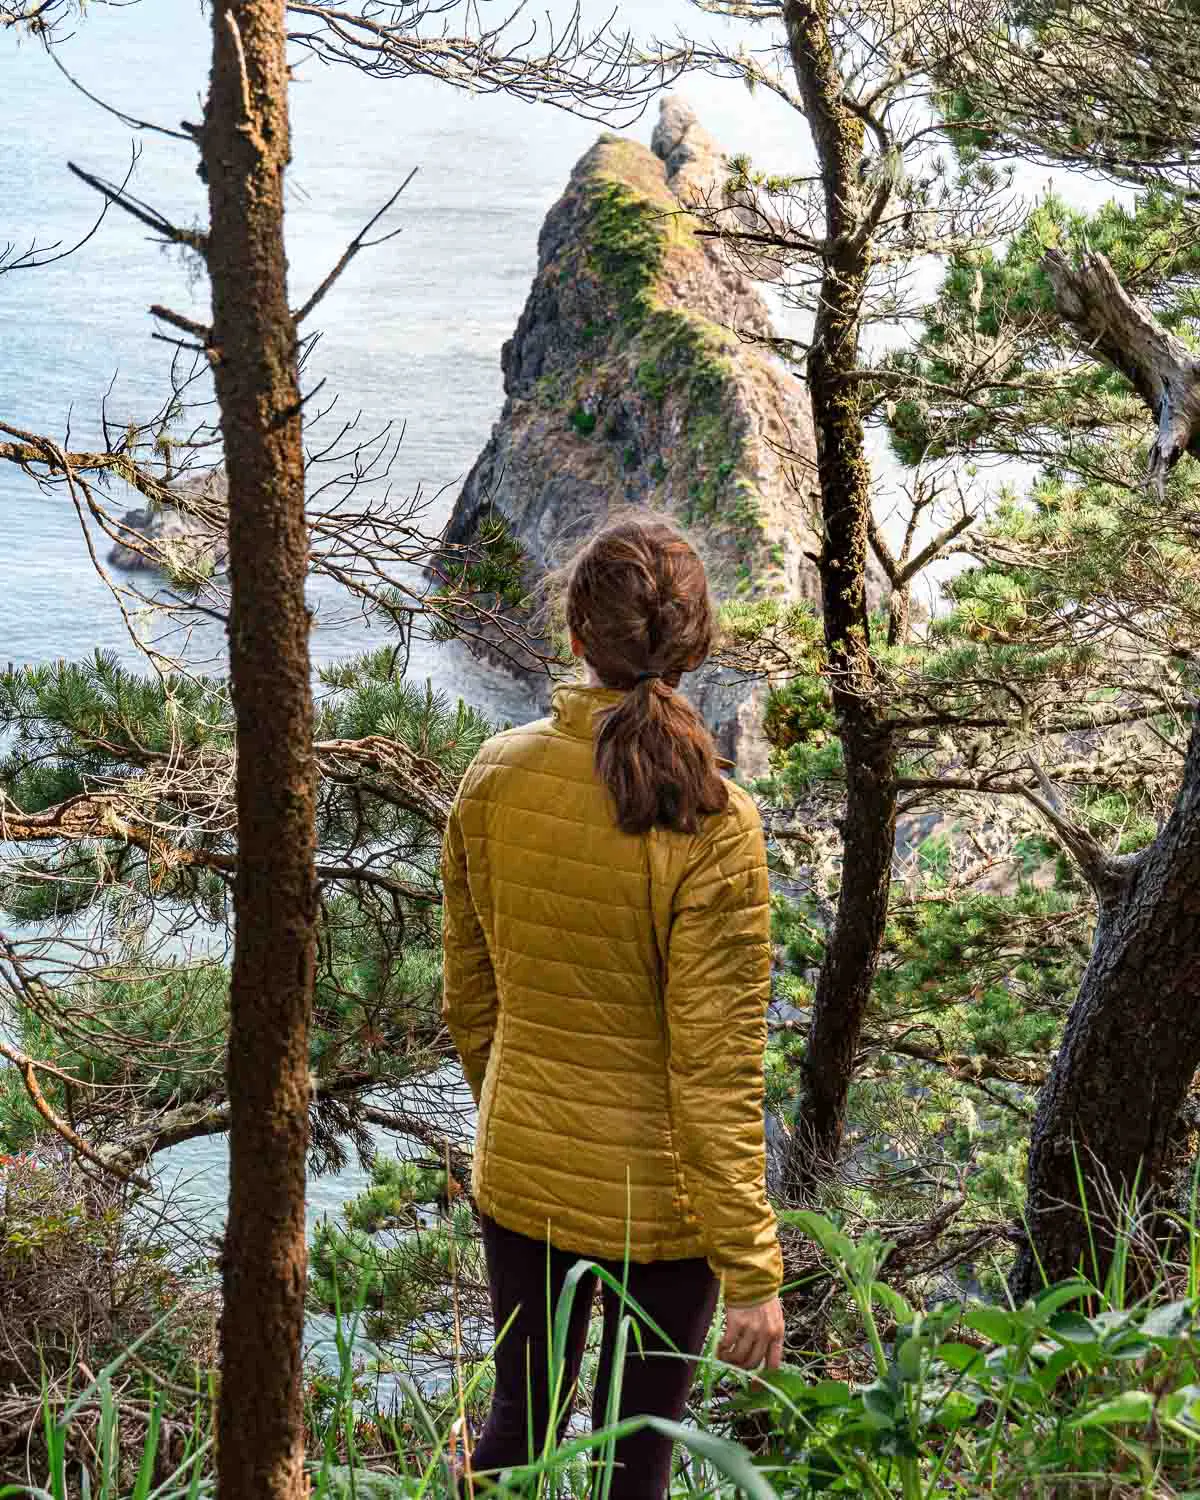 Megan stands among trees and looks out at a rock formation rising from the ocean